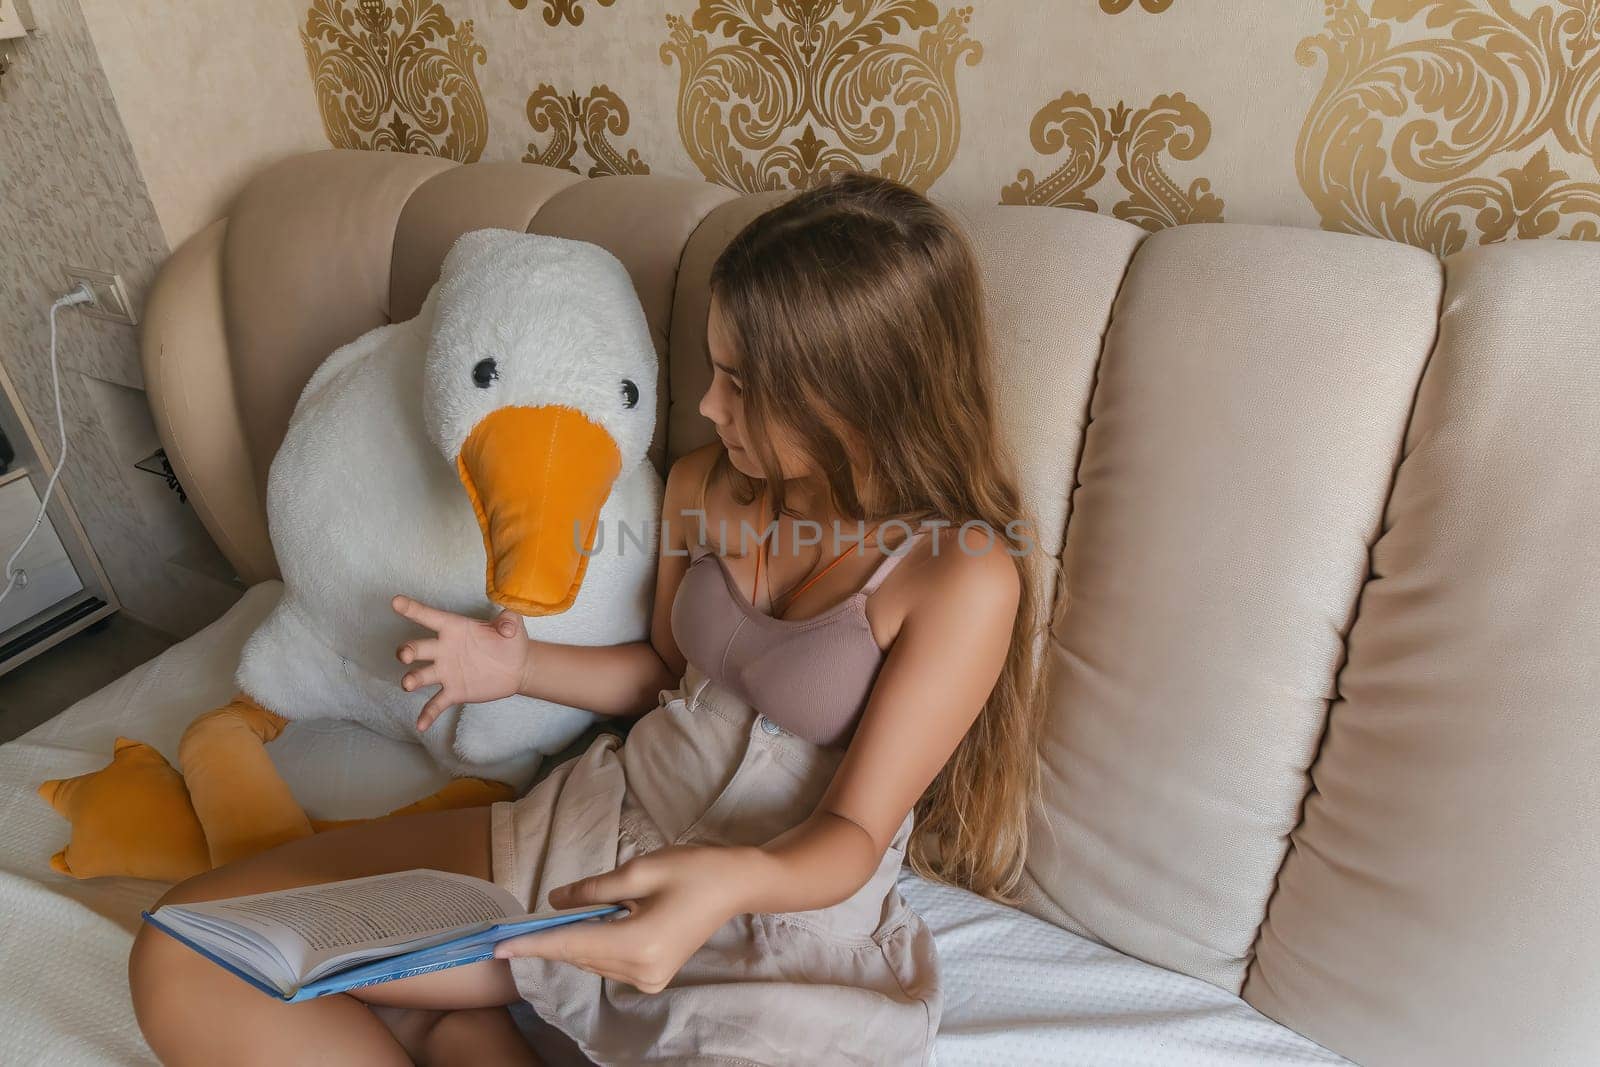 A girl is reading a book while sitting on a bed with a stuffed duck. The room has a gold and white color scheme, and there are two lamps in the room. by Matiunina